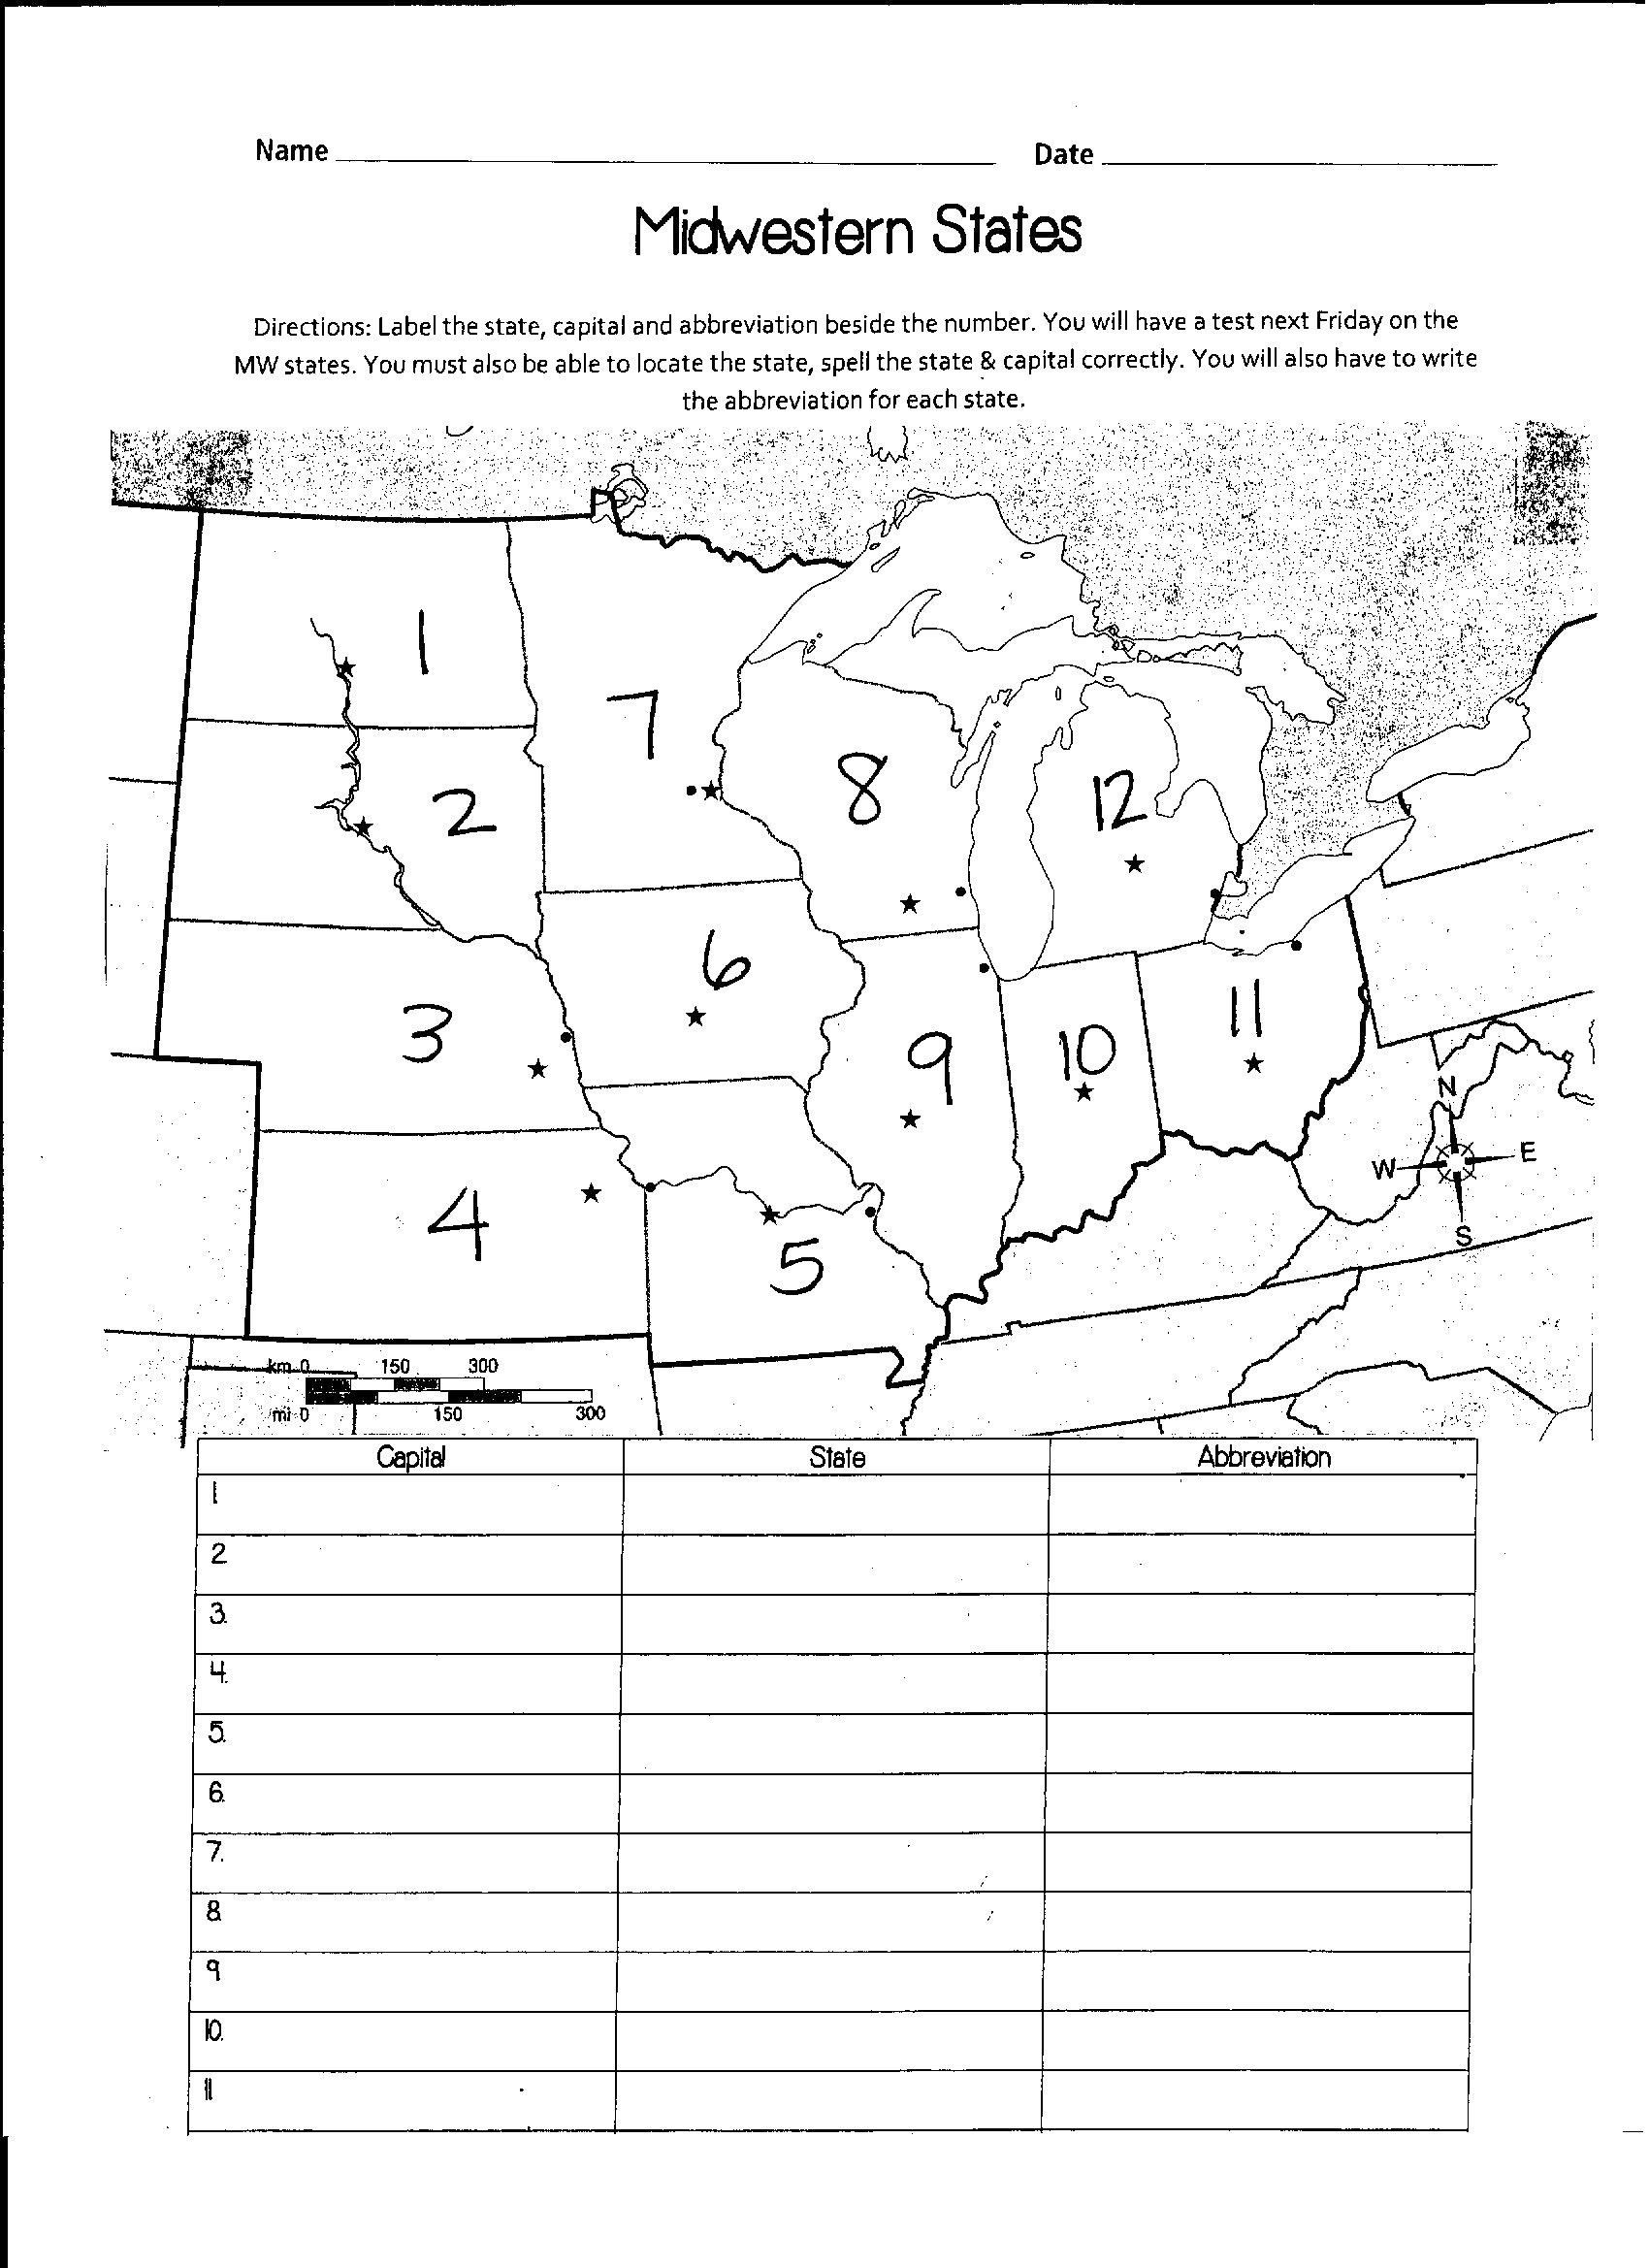 State and Capital Quiz Printable Image Result for Numbered States Map In West Regions Of